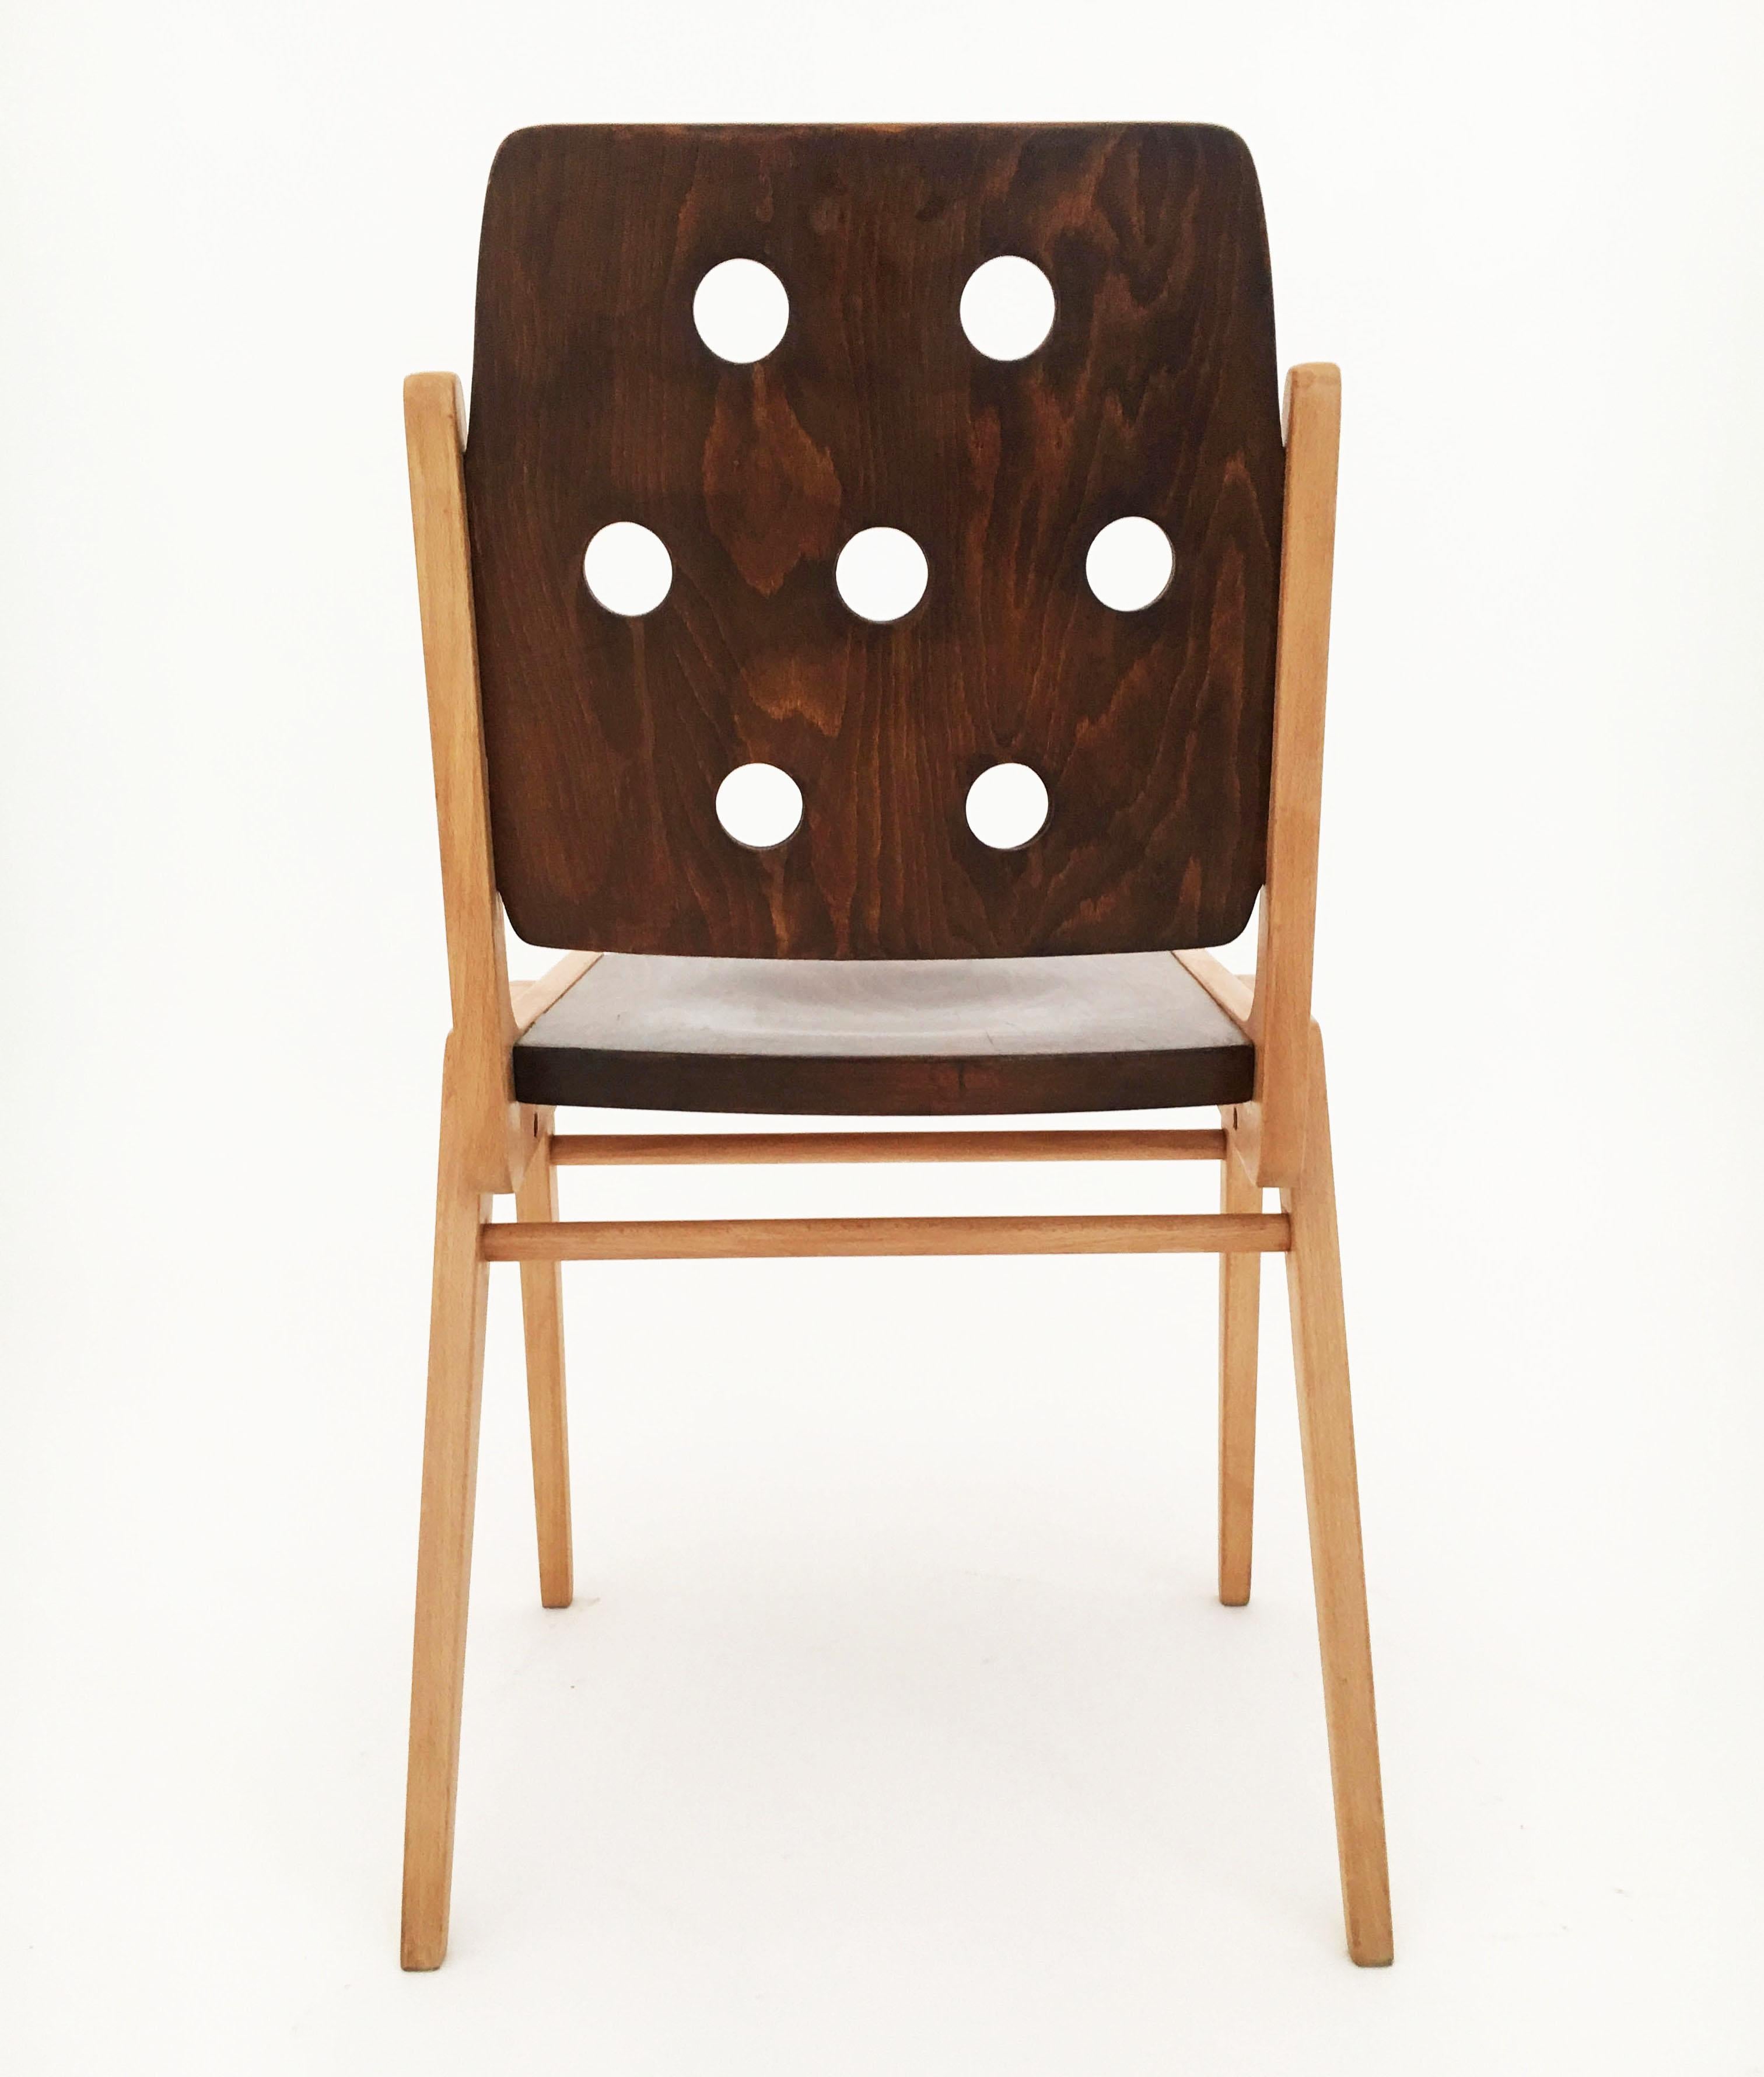 Up to 15 Franz Schuster 'Maestro' Stacking Dining Chairs, Austria, 1950s 3